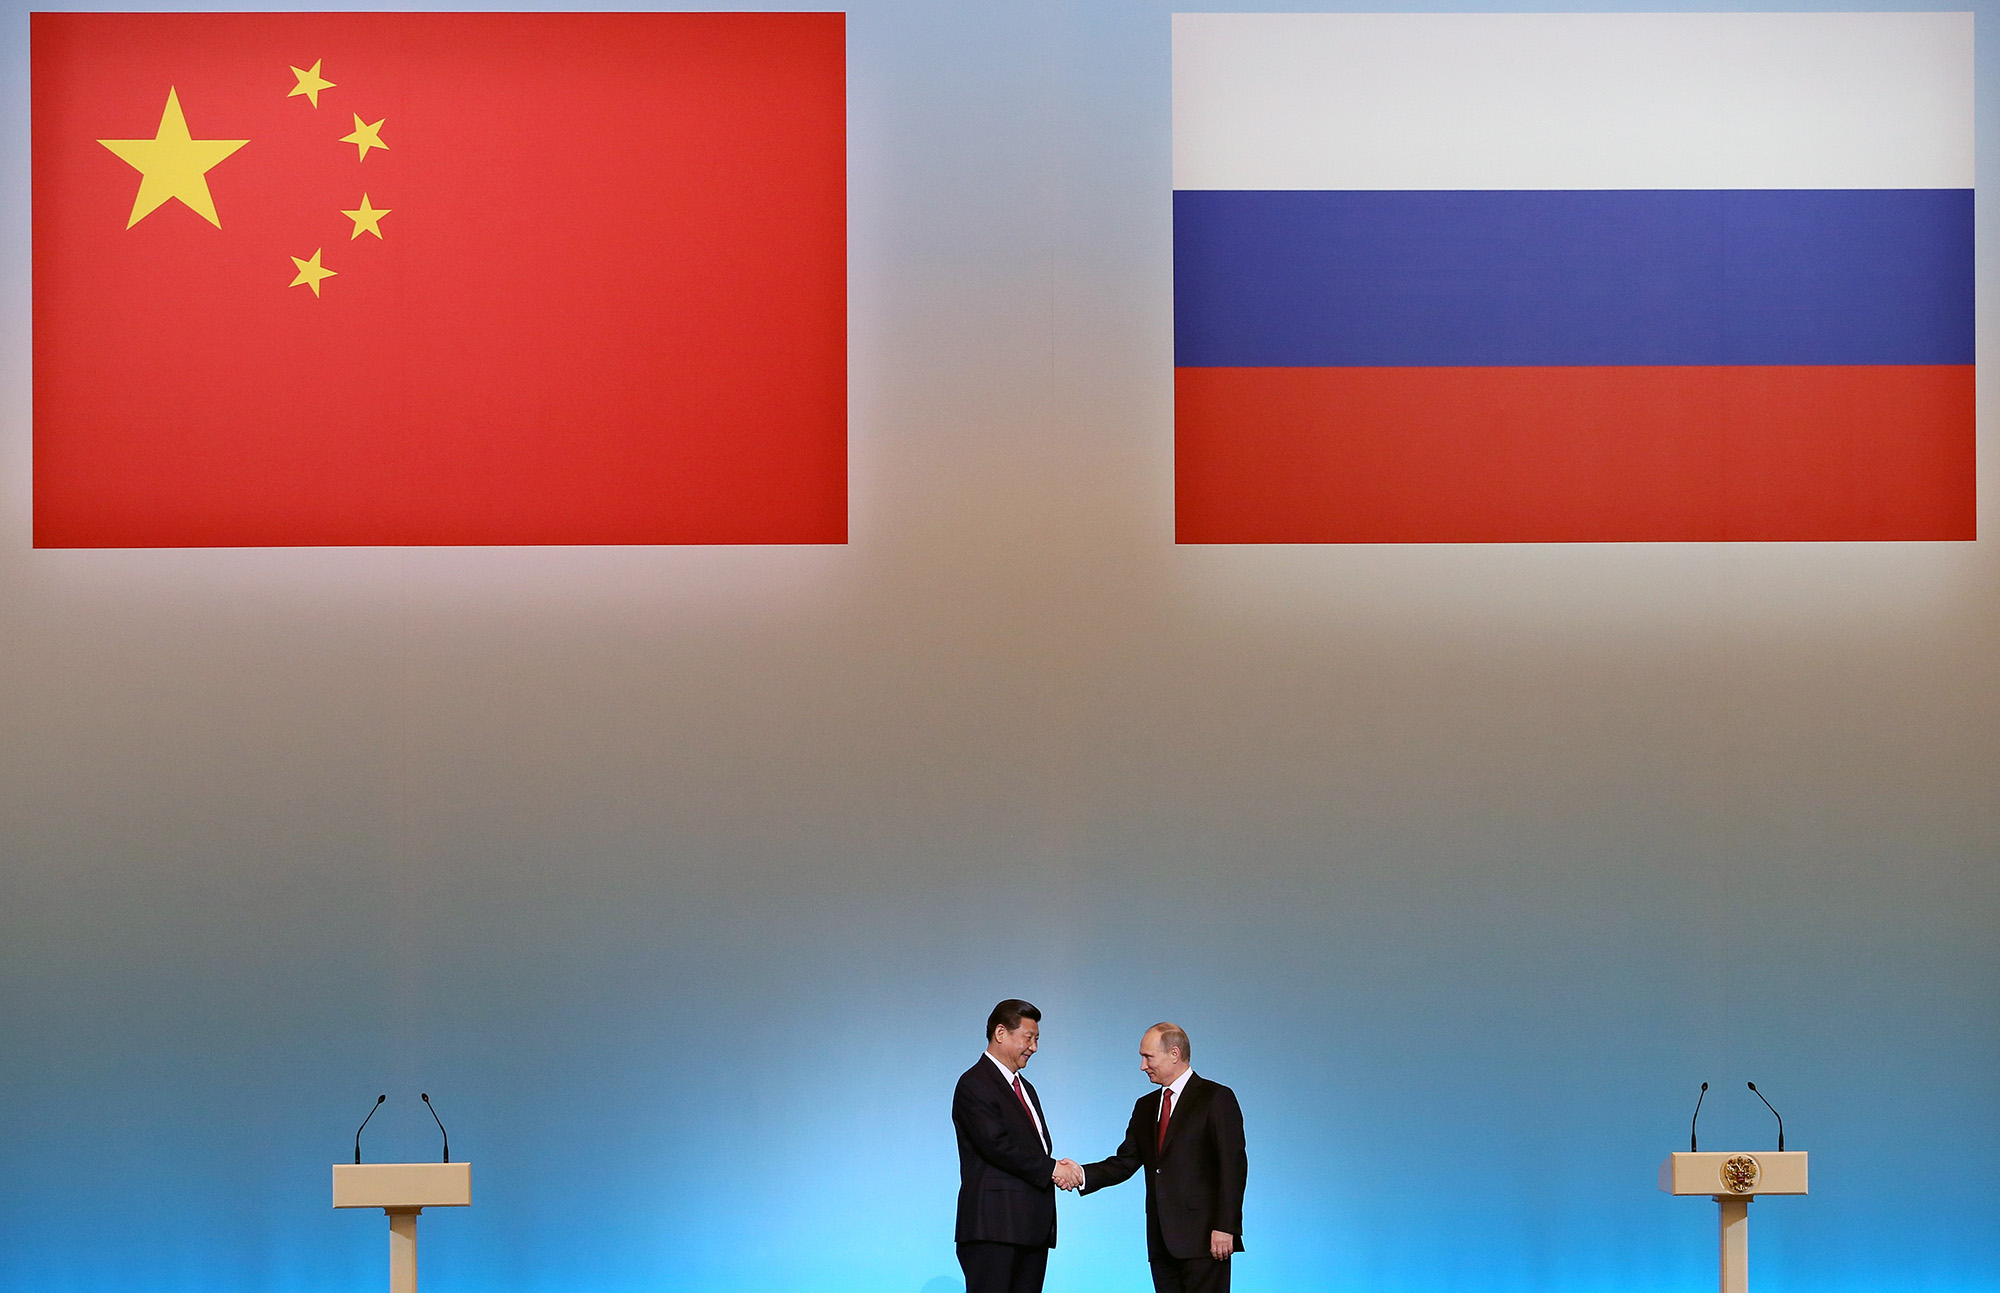 China's President Xi Jinping, left, is welcomed by his Russian counterpart Vladimir Putin during the opening ceremony of "The Year of Chinese Tourism in Russia" in Moscow, on March 22, 2013.